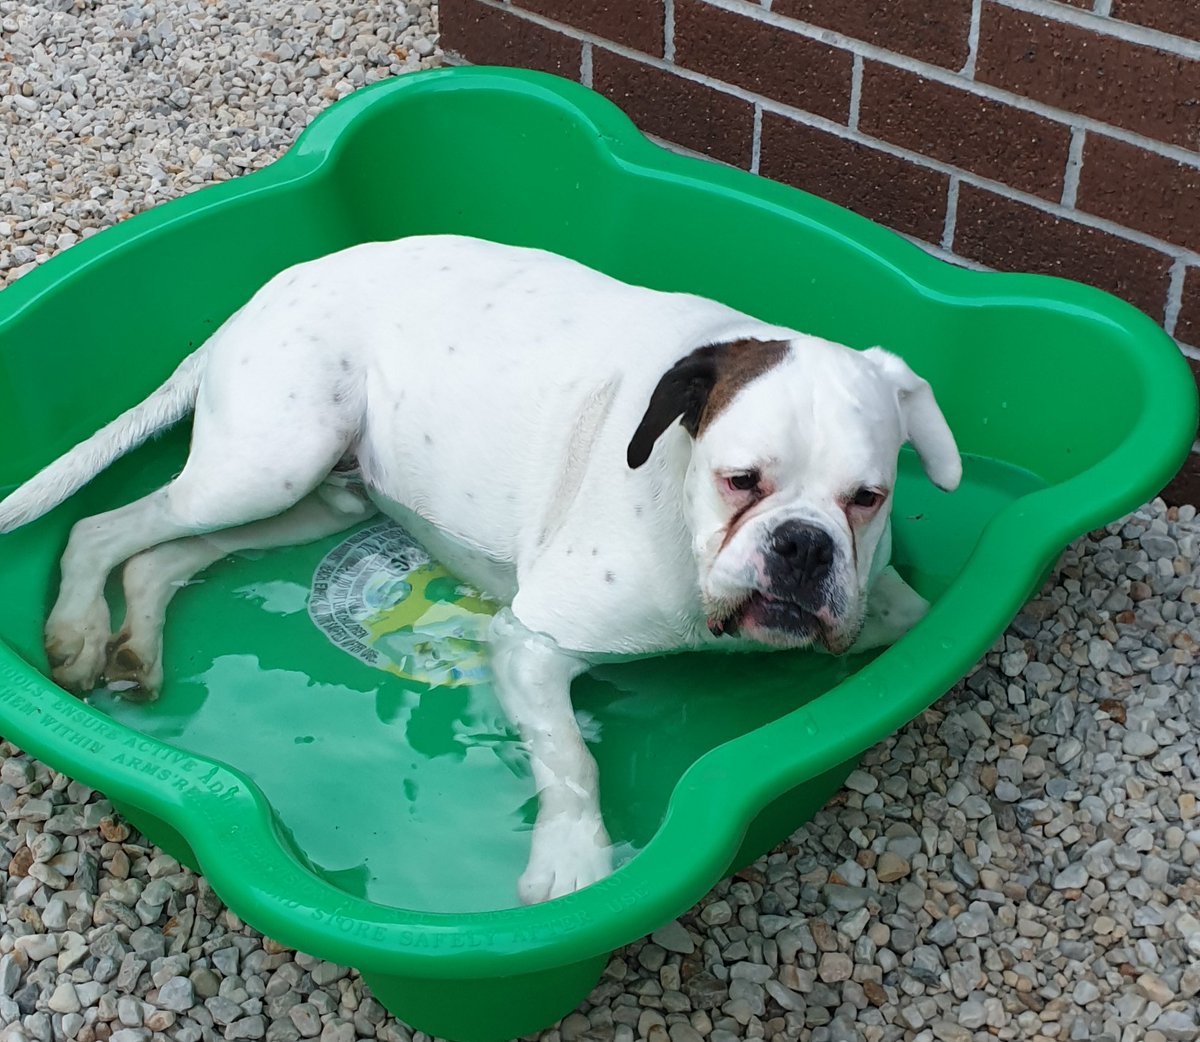 Went for a walk came home did this #bromocrew #sismos #paddlingpool